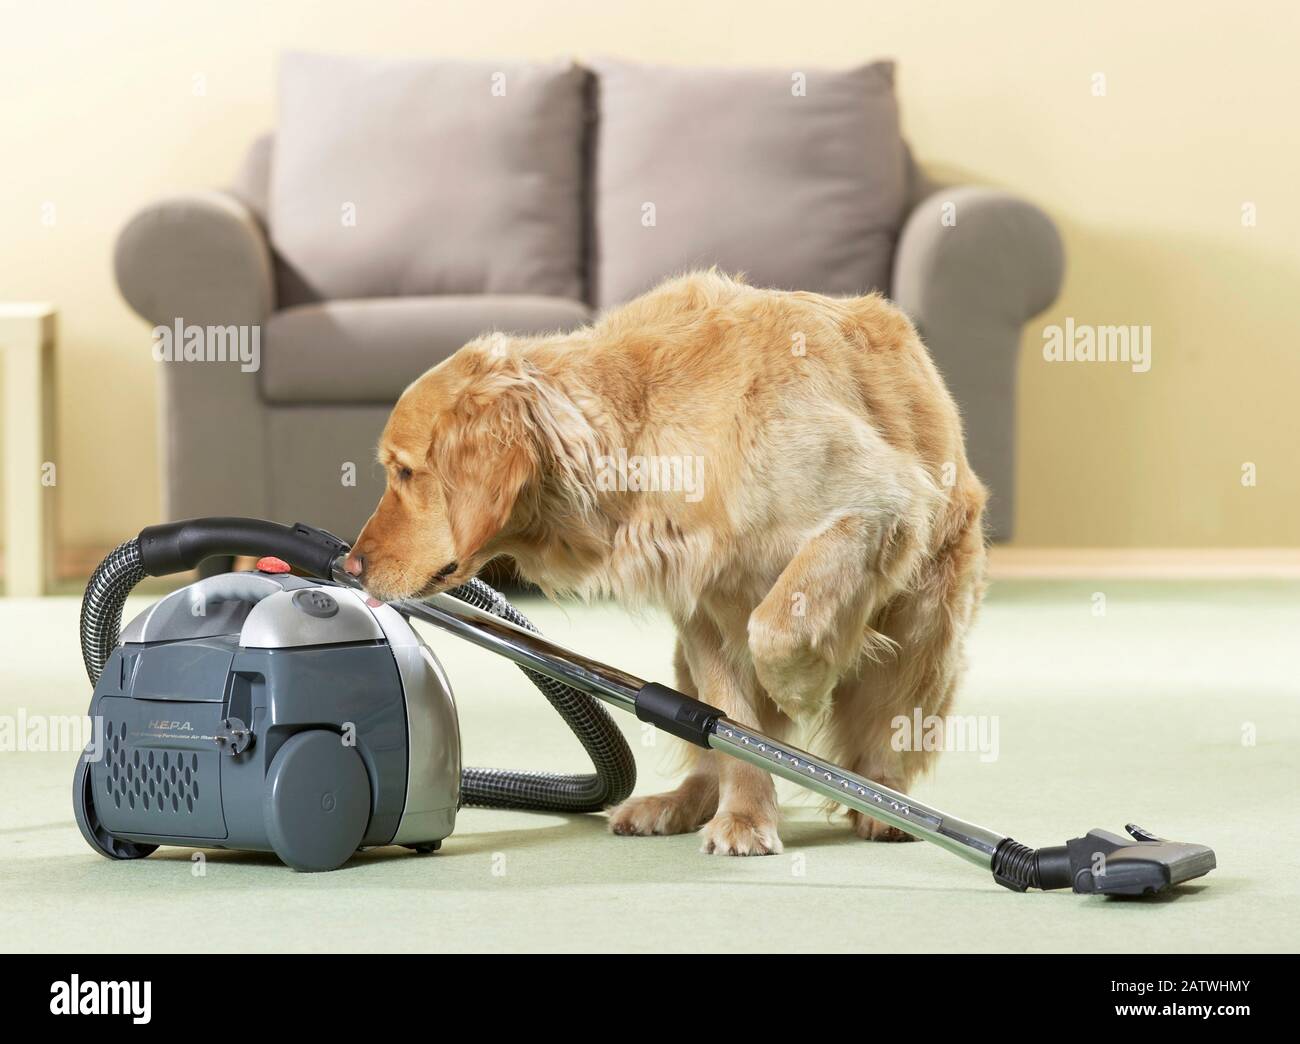 A Golden Retriever considers whether he takes a treat from a vacuum cleaner. Germany Stock Photo